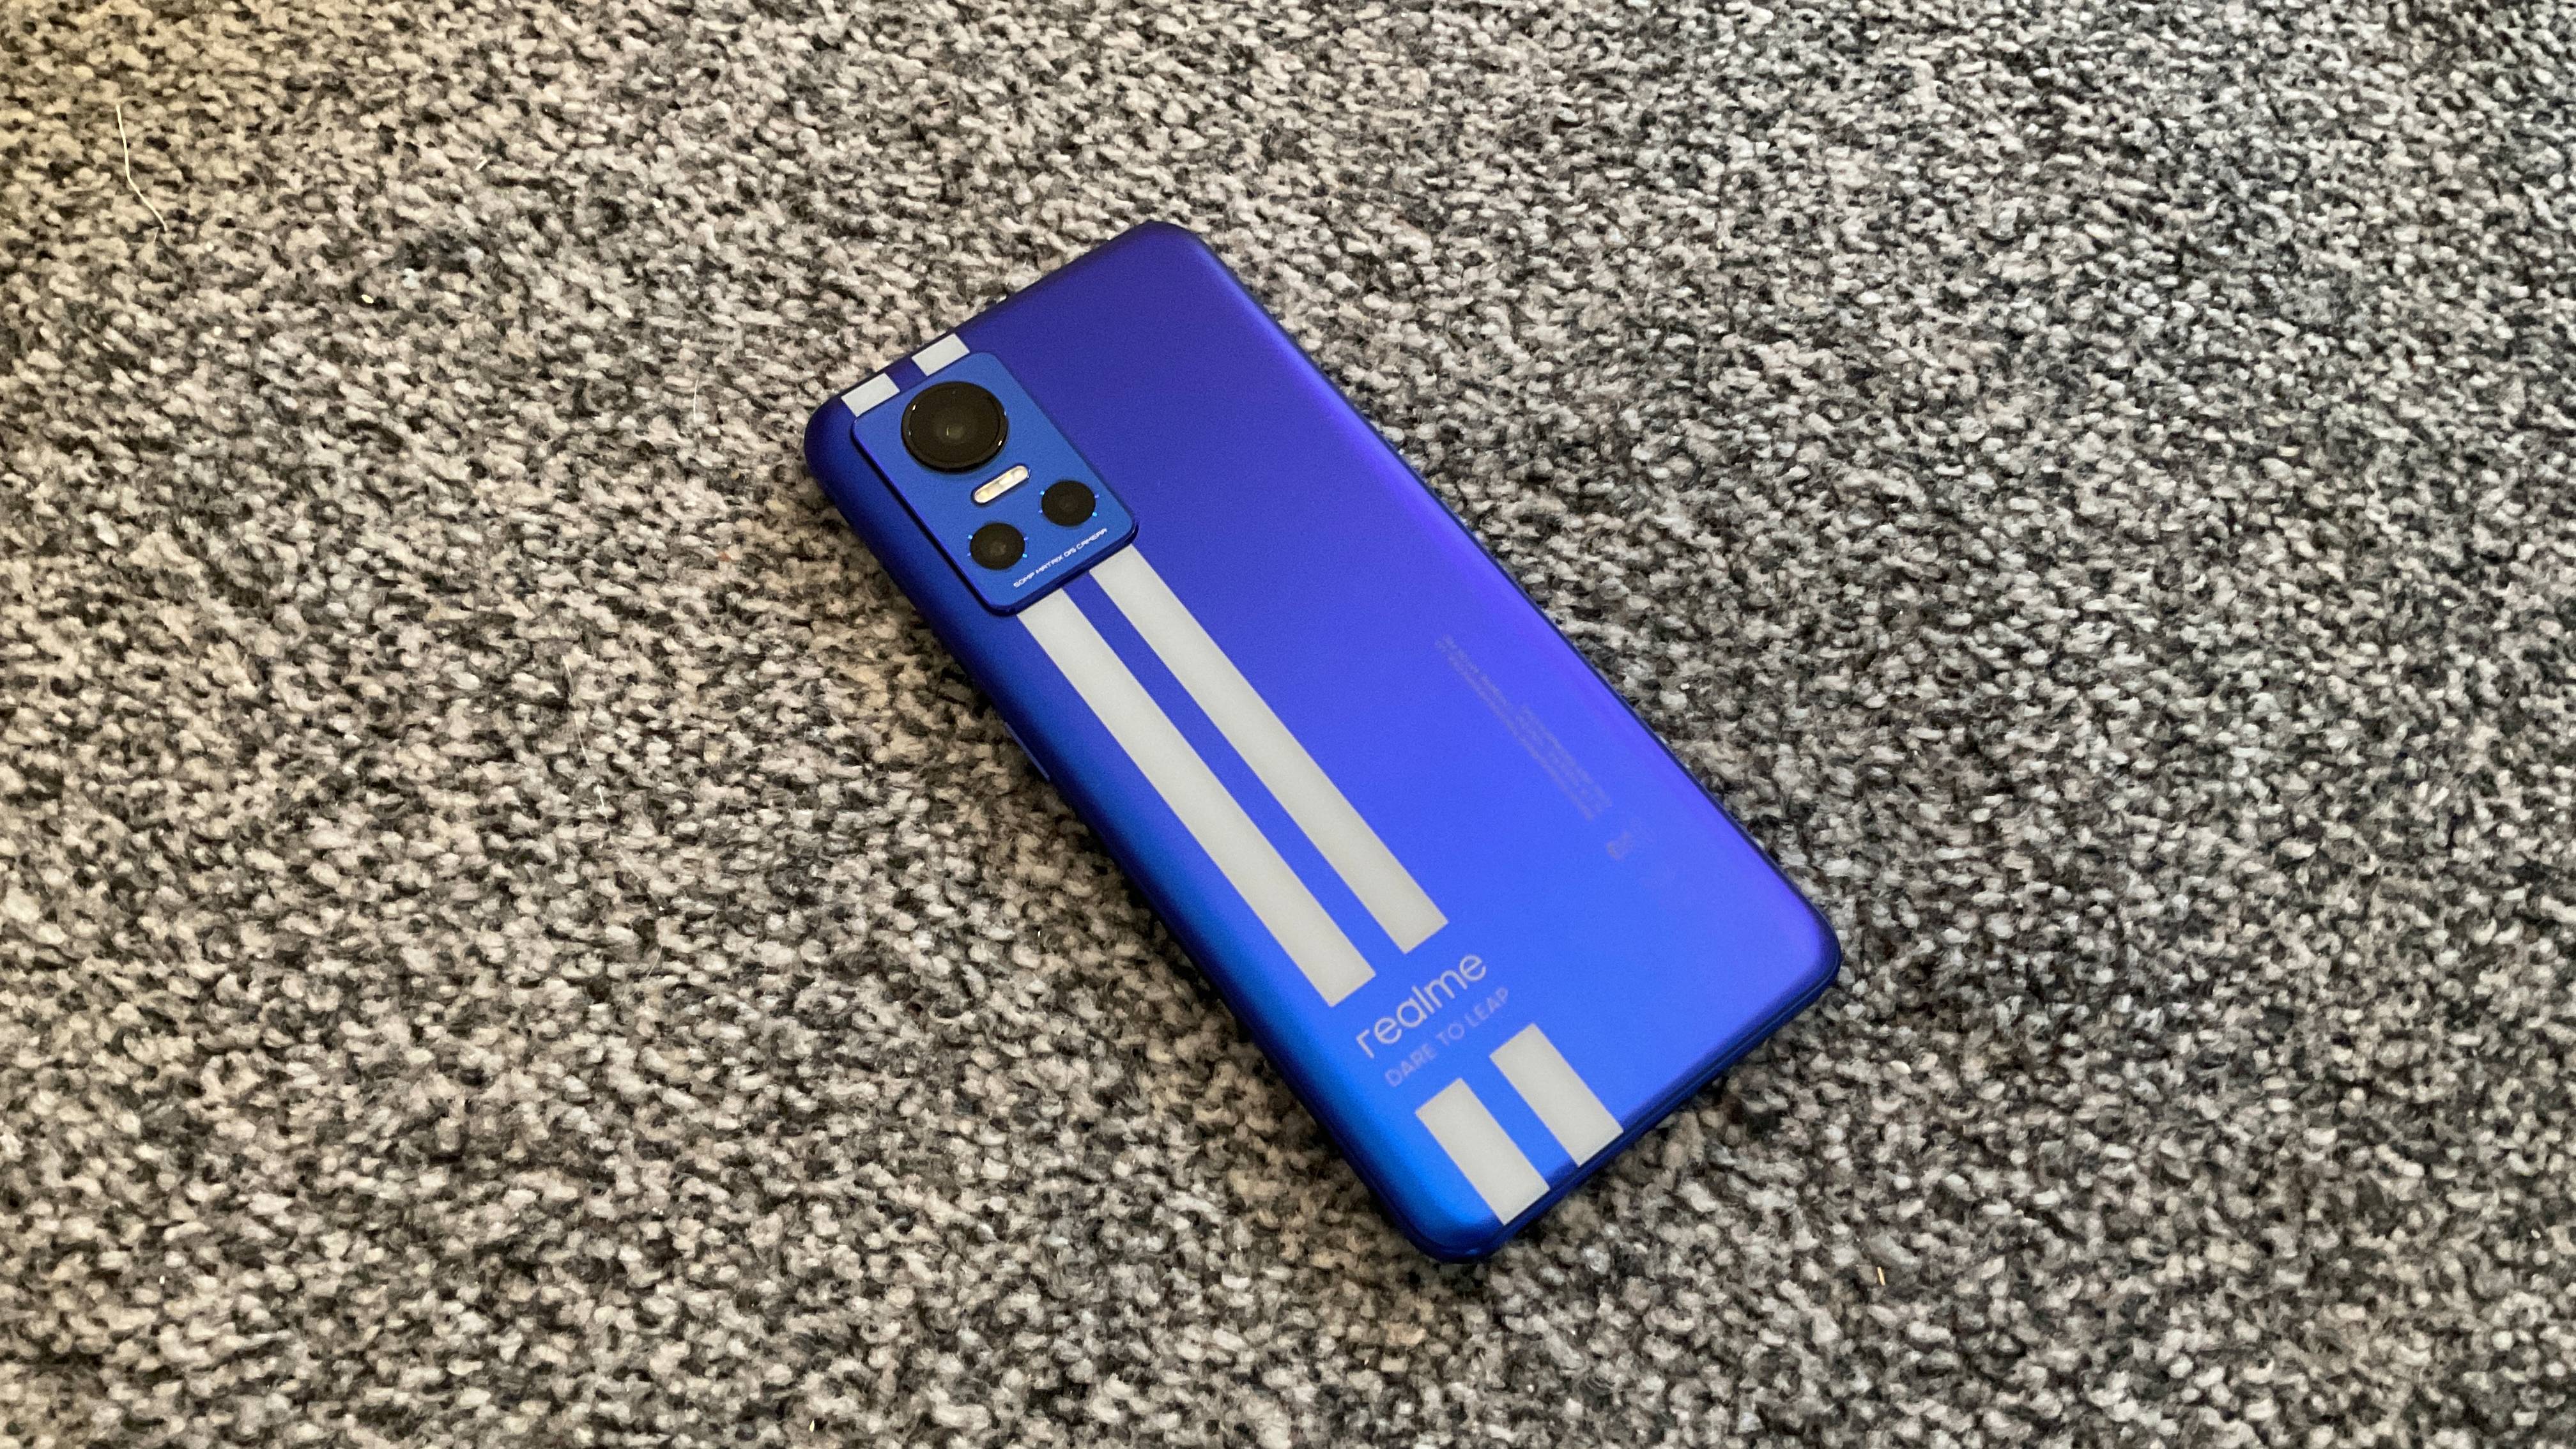 Hands on: Realme GT Neo 3 review